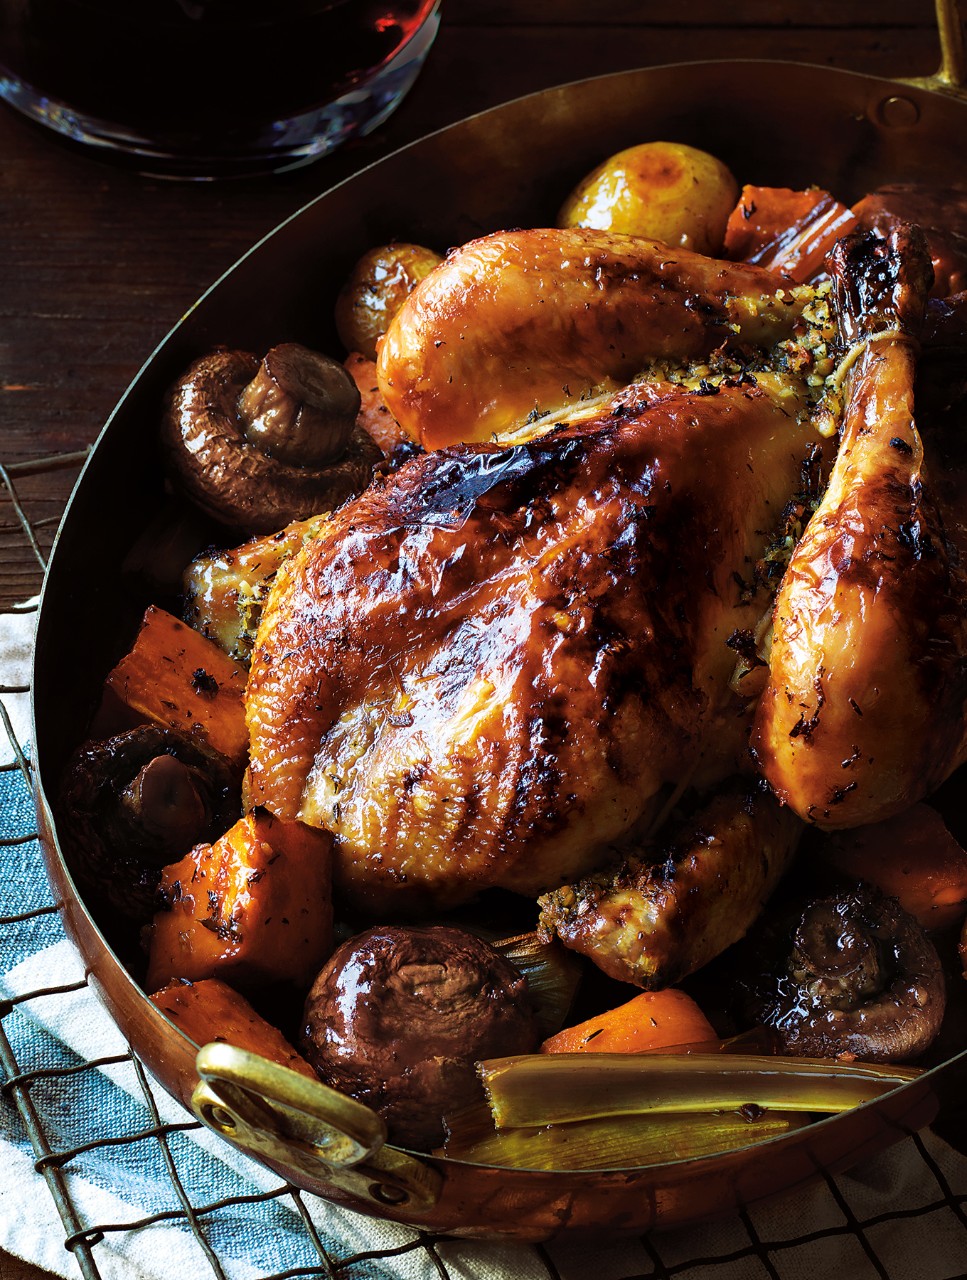 Cider & Maple-Glazed Chantecler Chicken with Roasted Leeks, Sweet & Baby Potatoes & Mushrooms